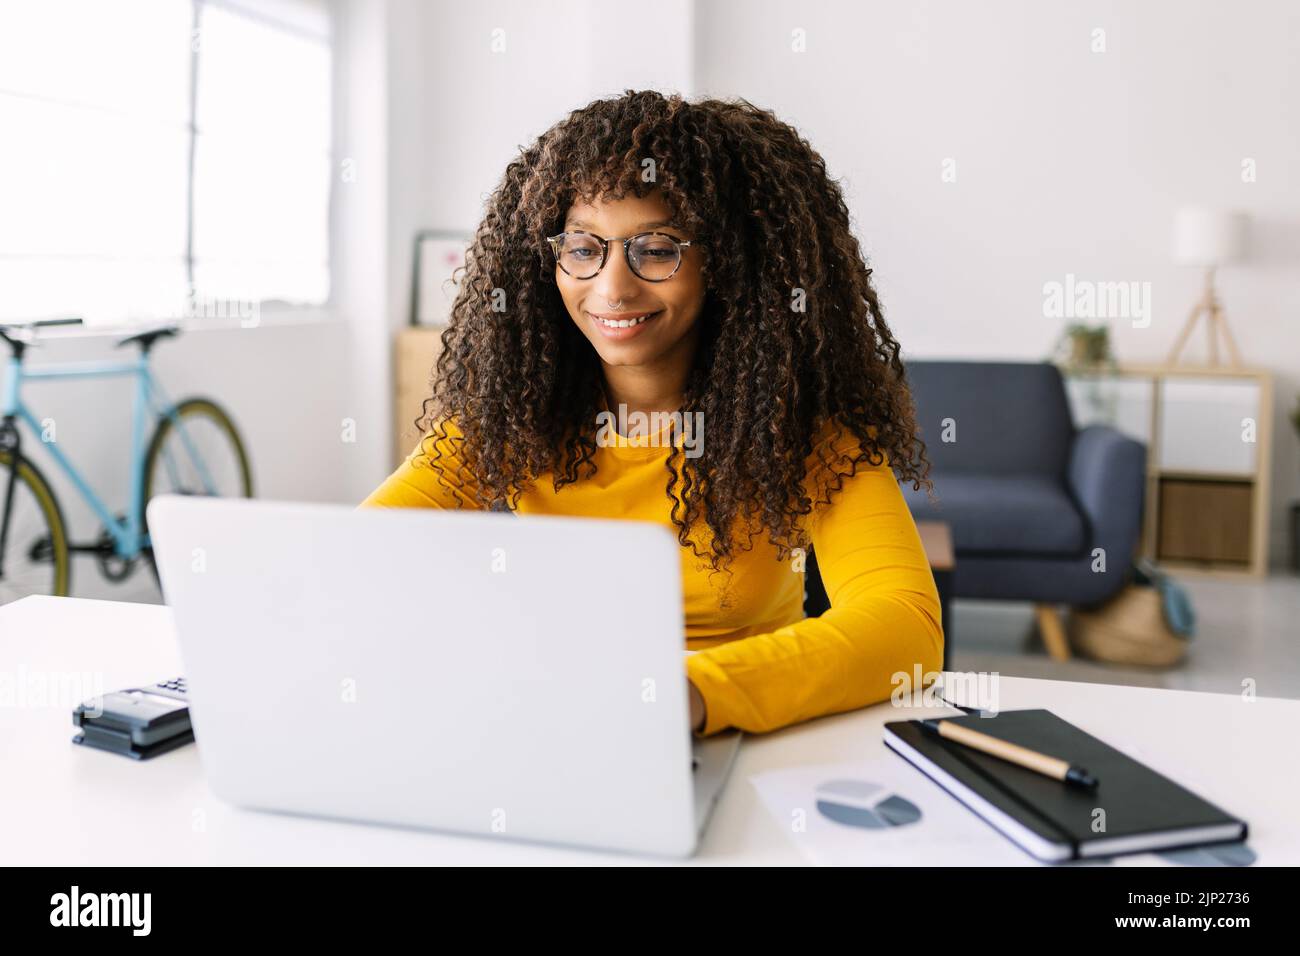 Young latin woman working on laptop at home Stock Photo